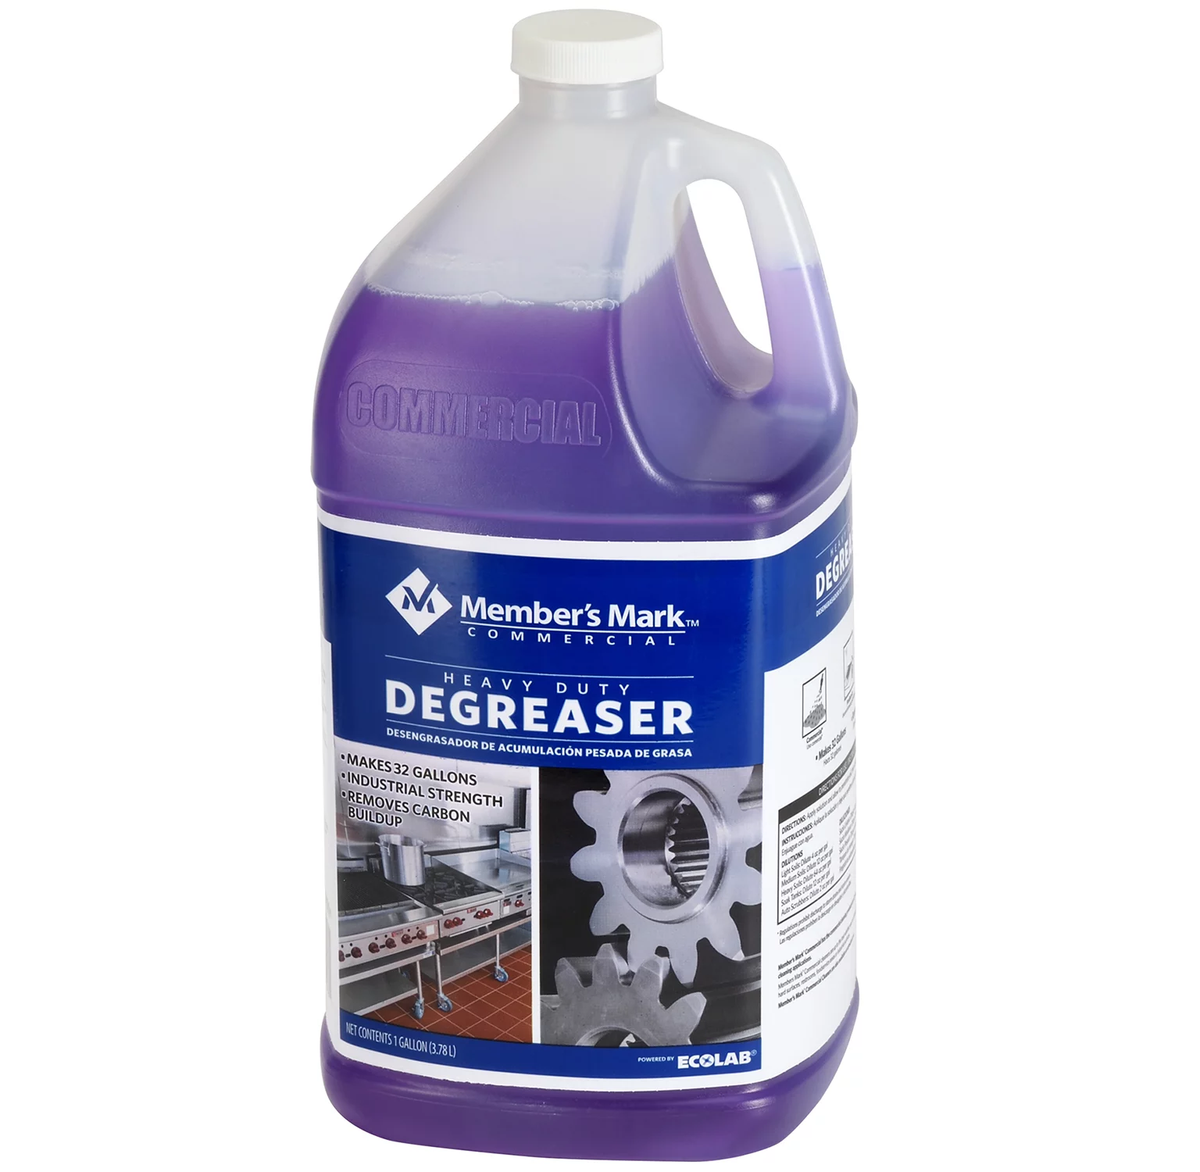  AutoGeneral Degreaser - Heavy-Duty Multipurpose Multisurface  Alkaline Cleaner and Oil Remover - For Automotive Garages, Floors,  Concrete, and More - Commercial-Grade - Industrial Strength - 1 Gallon :  Automotive